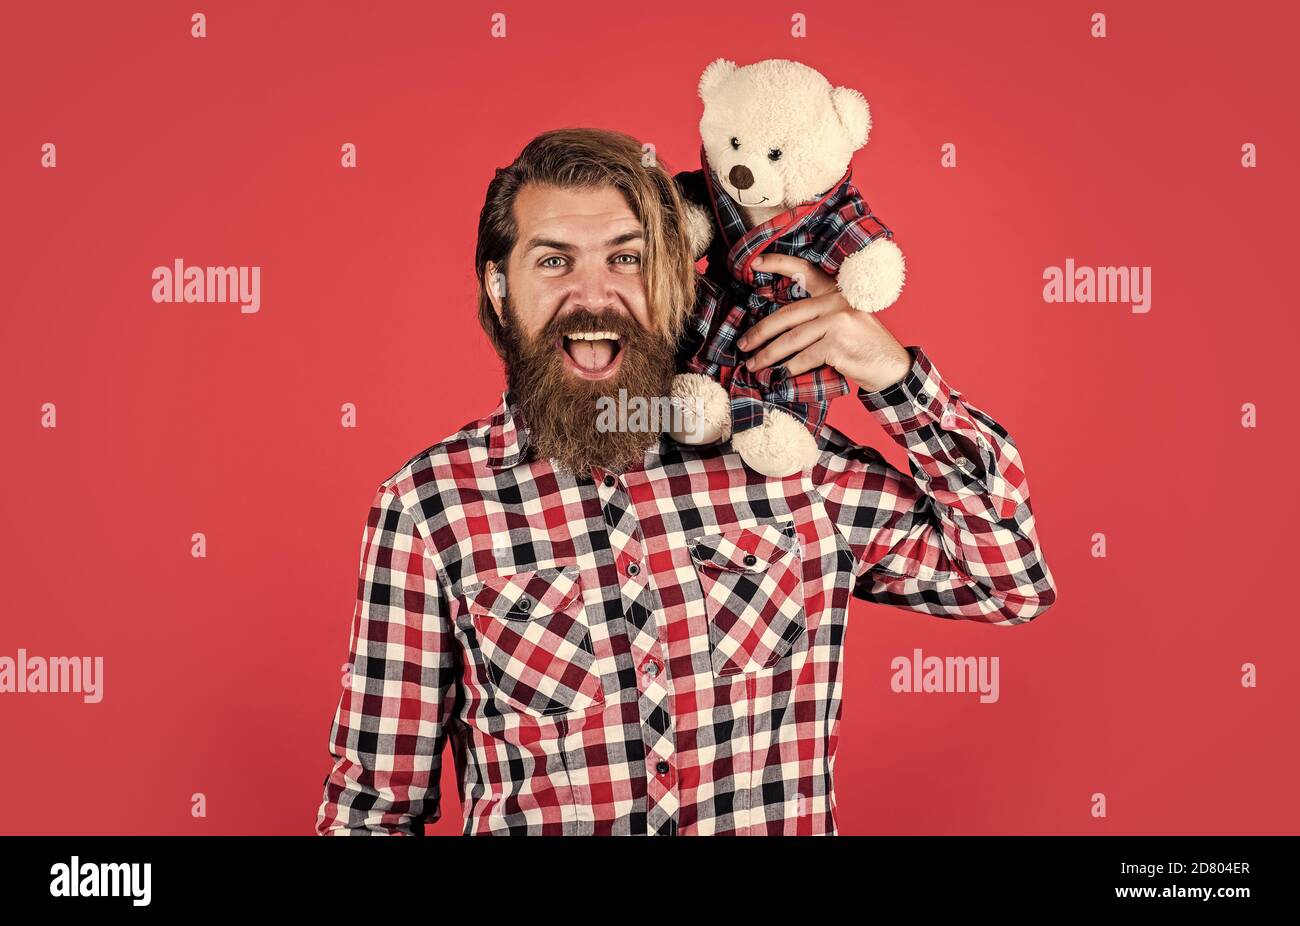 cheerful bearded man hold teddy bear. male feel playful with bear. brutal mature hipster man play with toy. happy birthday. being in good mood. happy valentines day. Valentines day sales. Stock Photo